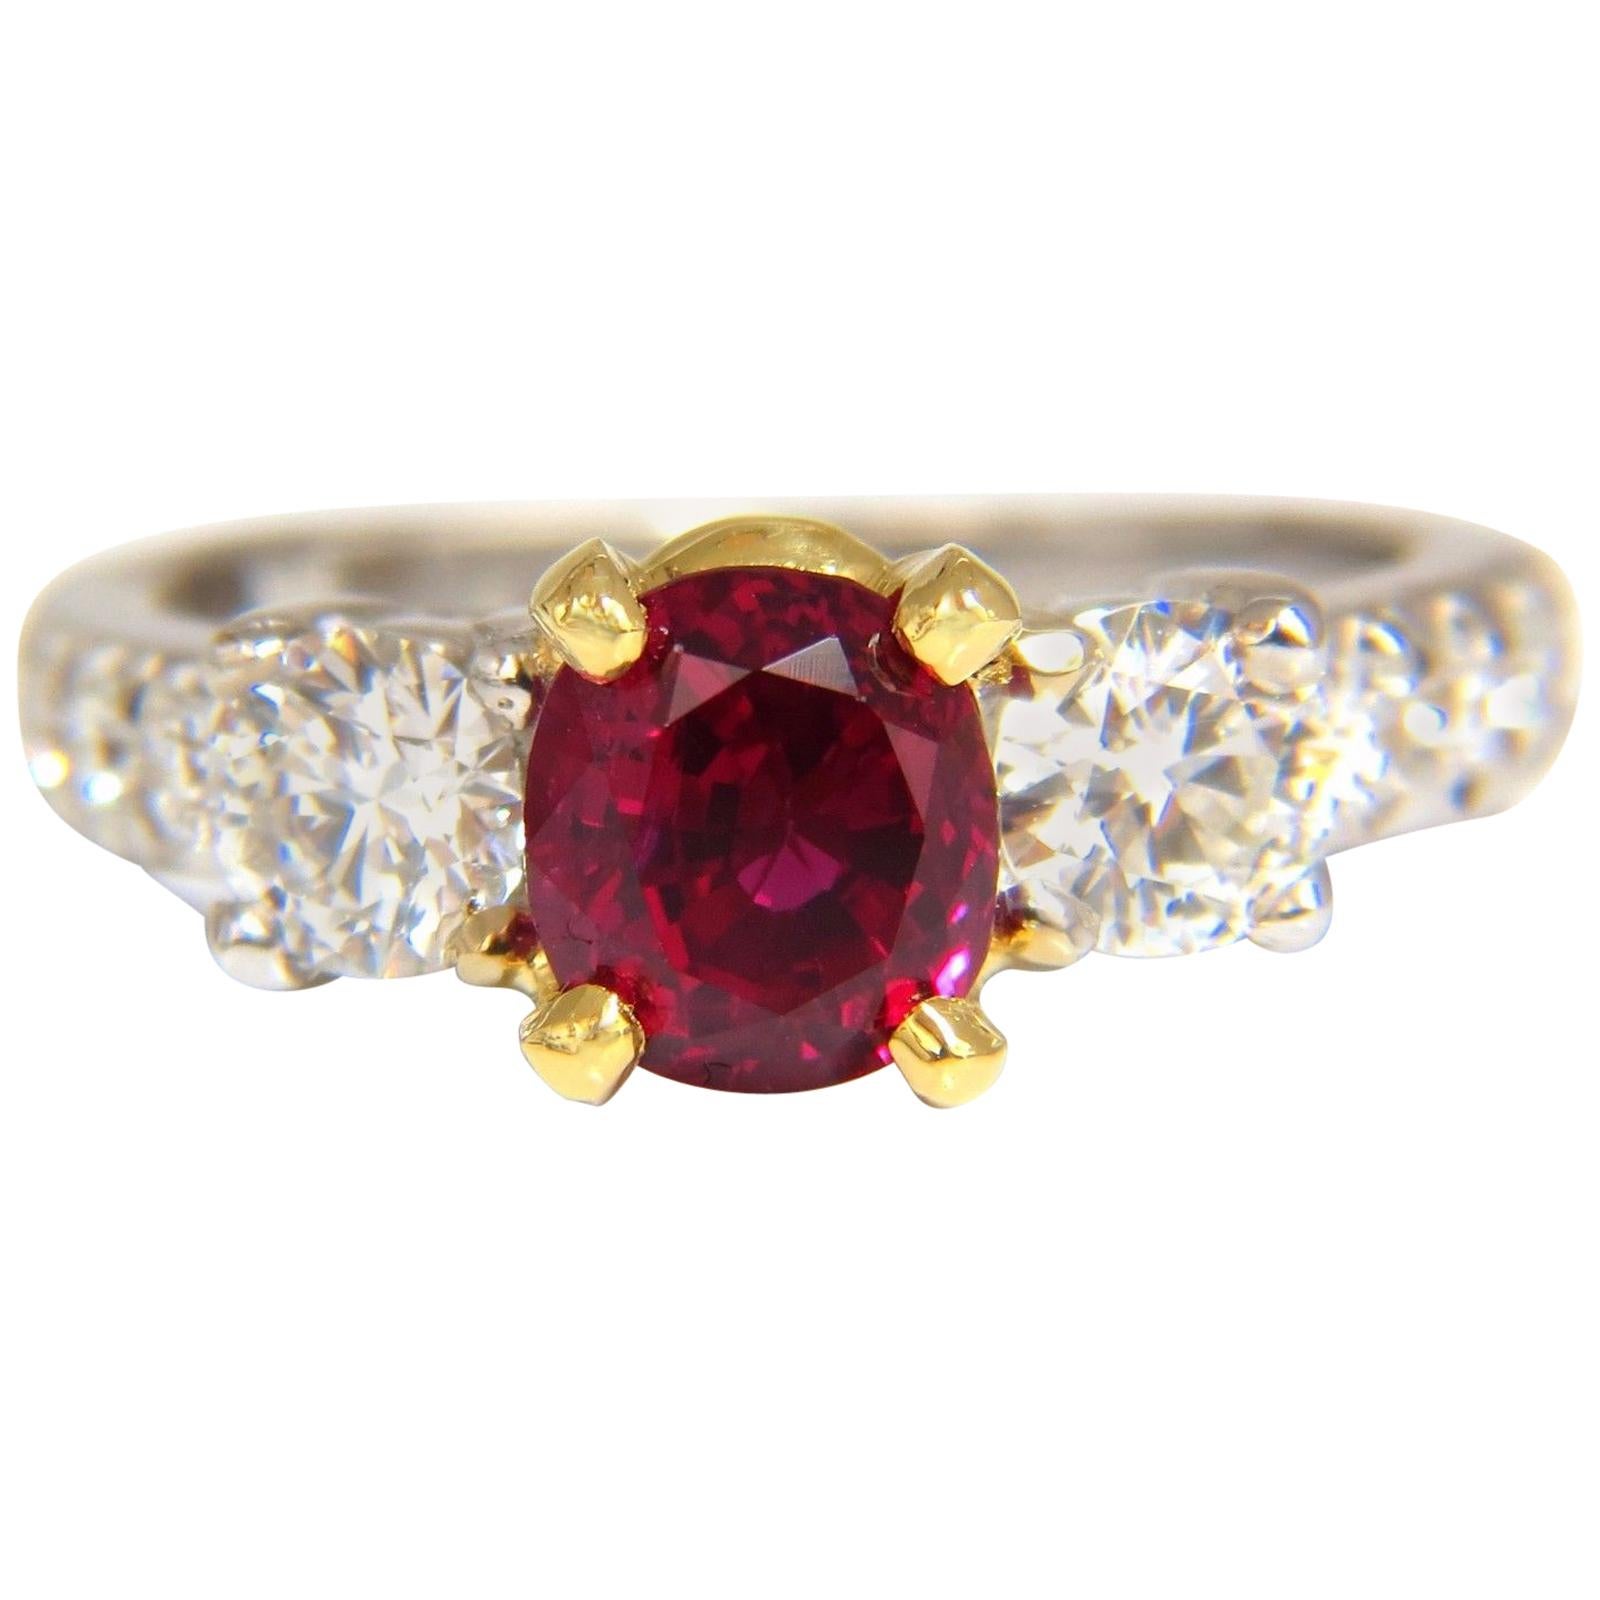 GIA Certified 1.83ct oval cut pigeons blood red ruby 1.02ct diamonds ring 18kt